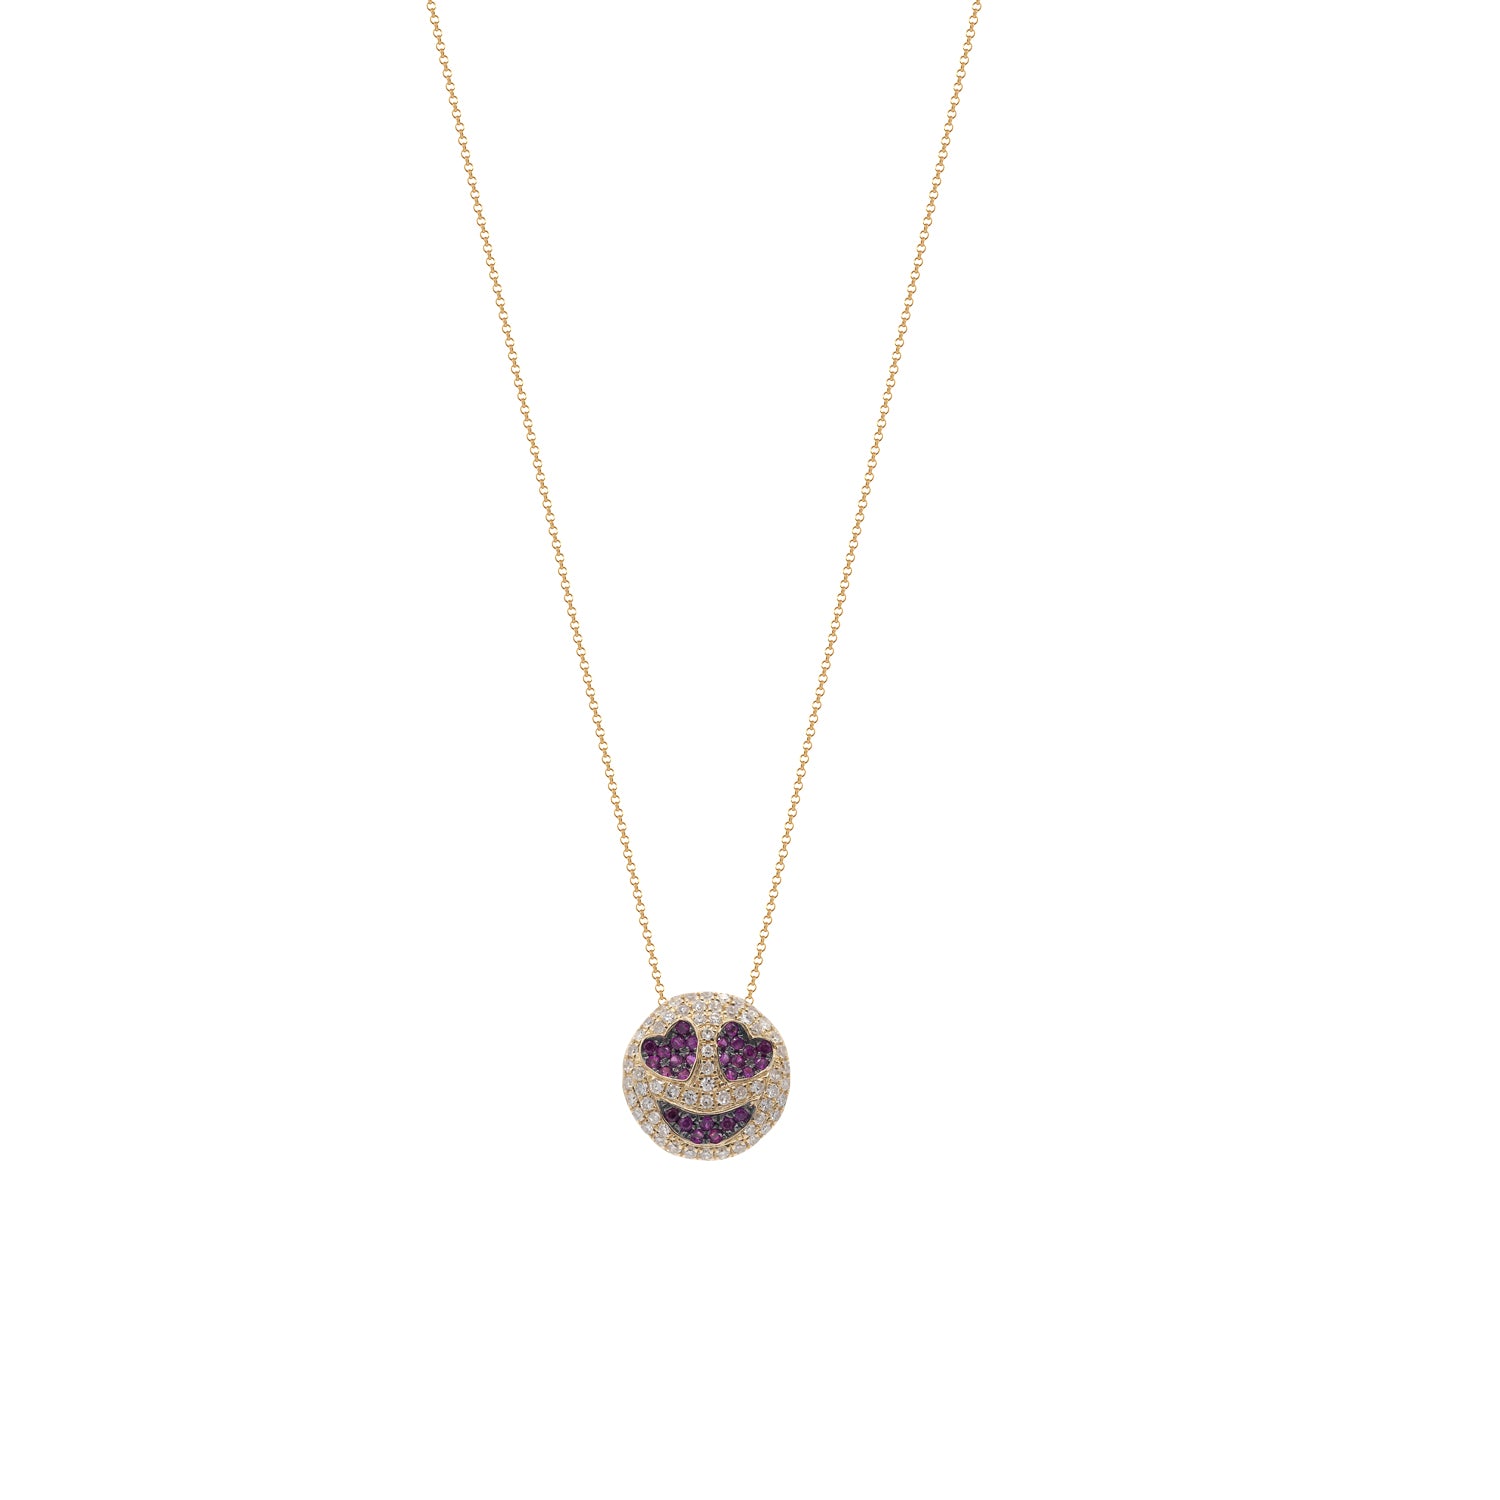 Symbol necklace. Heart, butterfly, round necklace. Gift necklace. Gold necklace. Diamond necklace. Precious stone necklace. Evil Eye necklace. Chain necklace. Easy to wear necklace. Anatol jewelry. Fine jewelry. Golden Hall. Kifissia. Athens. Χρυσό κολιέ. Κολιέ με διαμάντια. Χρυσά κοσμήματα. Κηφισιά. Κολιέ με μπριγιάν.